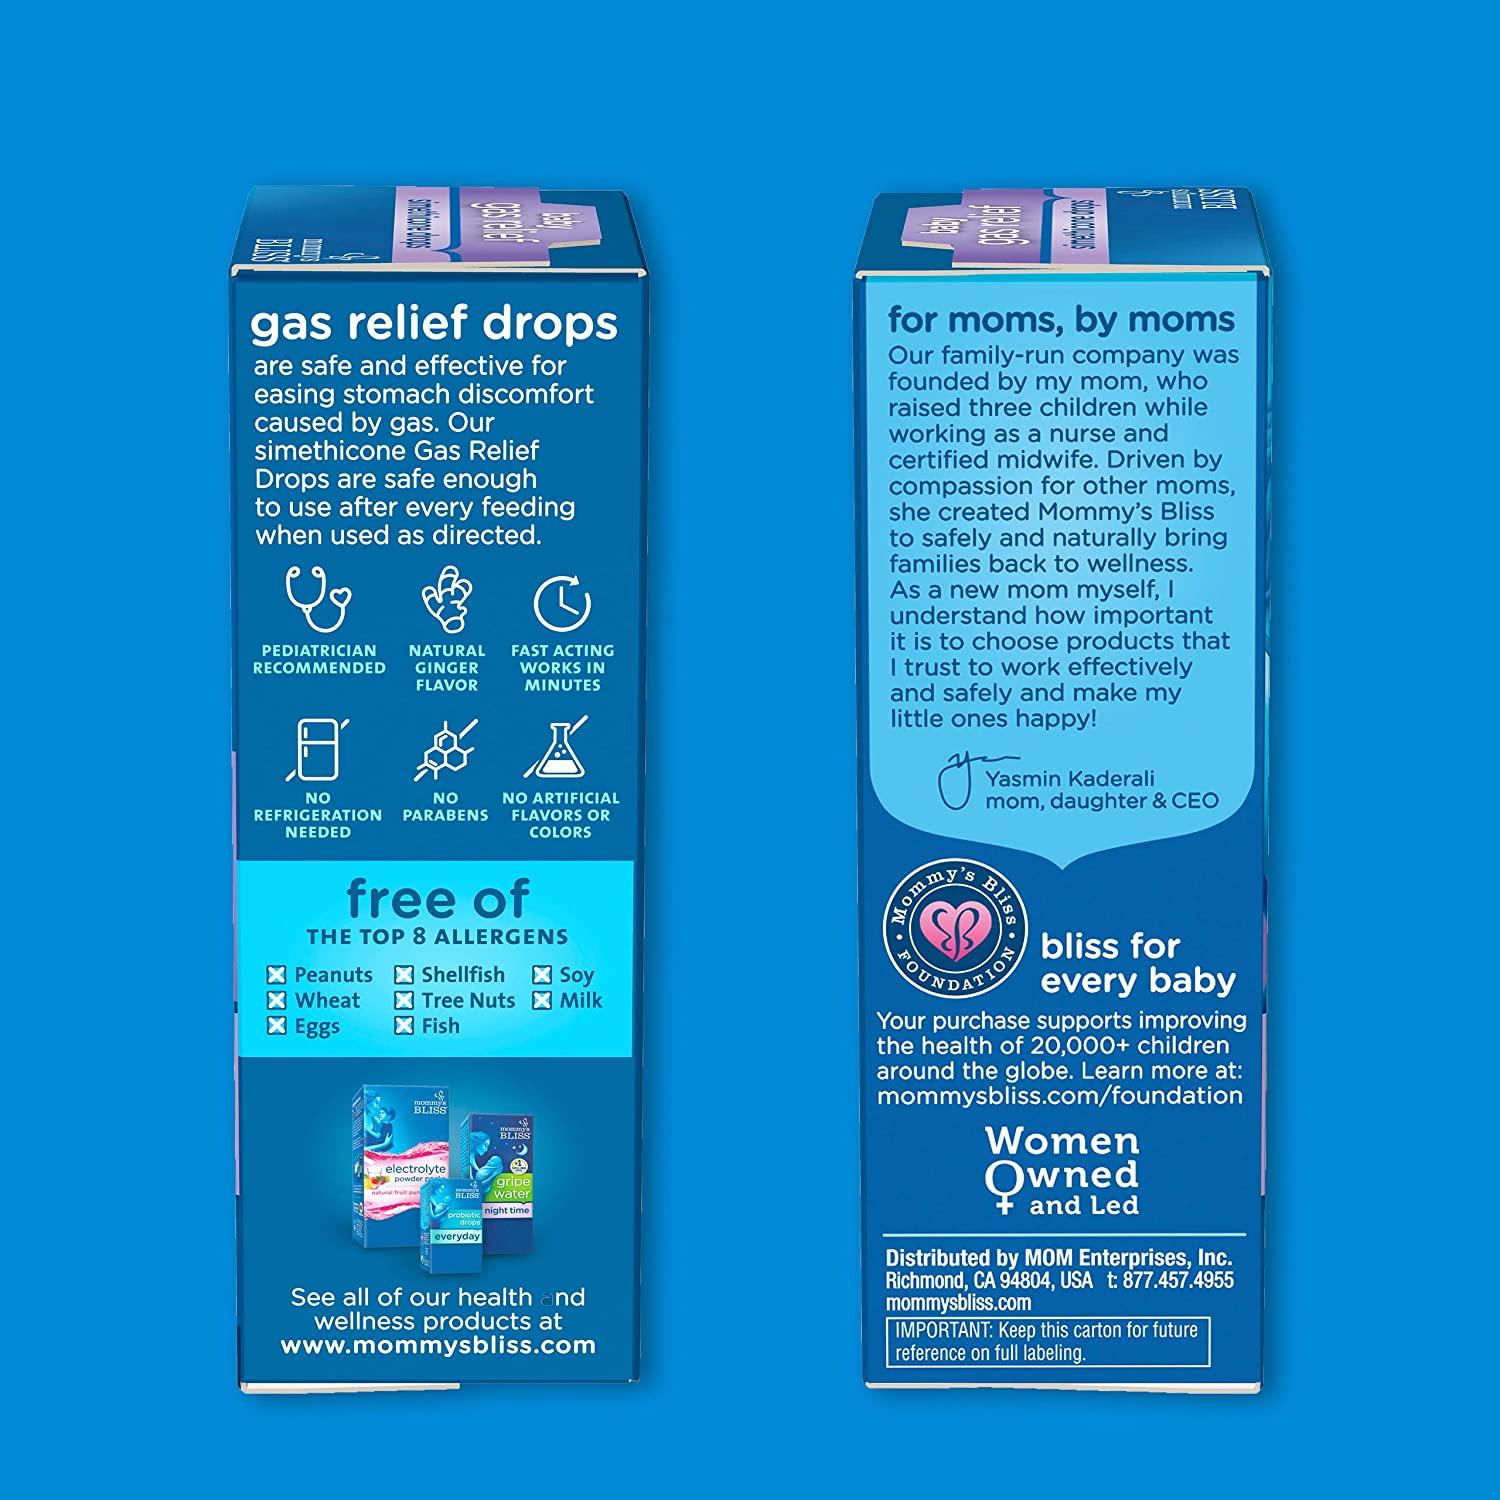 Mommy's Bliss Gripe Water Day + Night Combo Pack